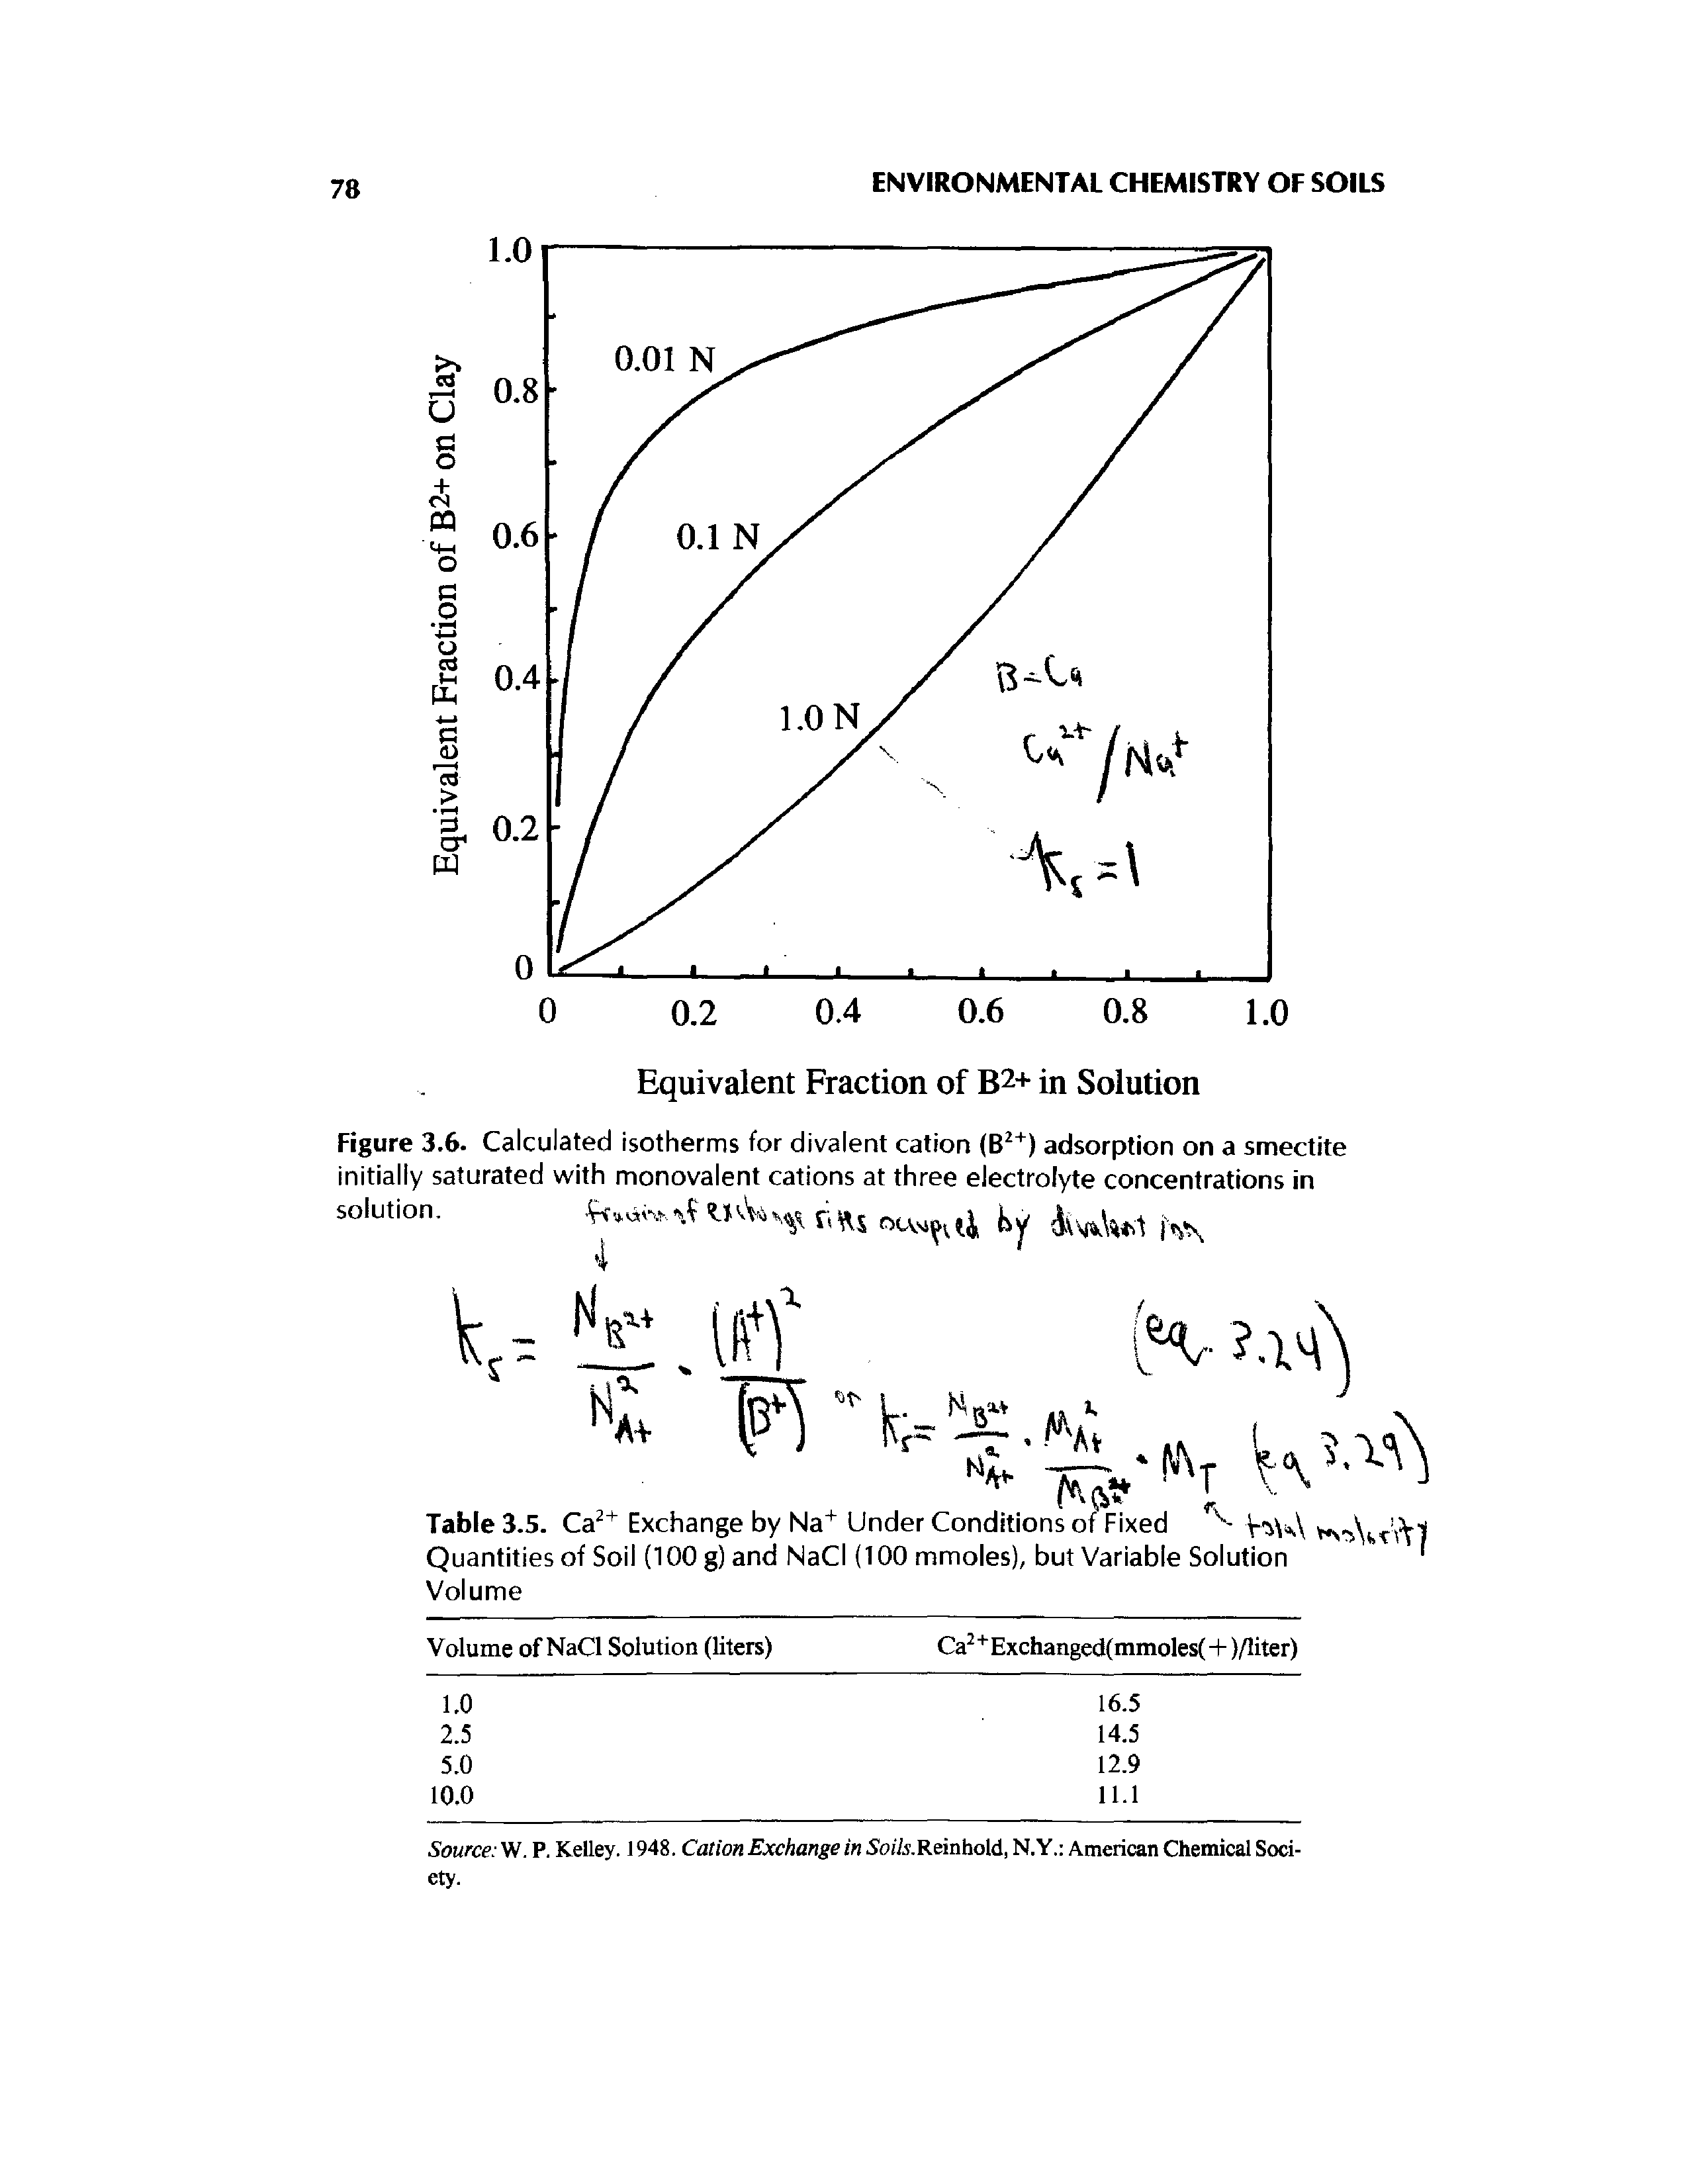 Figure 3.6. Calculated isotherms for divalent cation (B ) adsorption on a smectite initially saturated with monovalent cations at three electrolyte concentrations in solution.